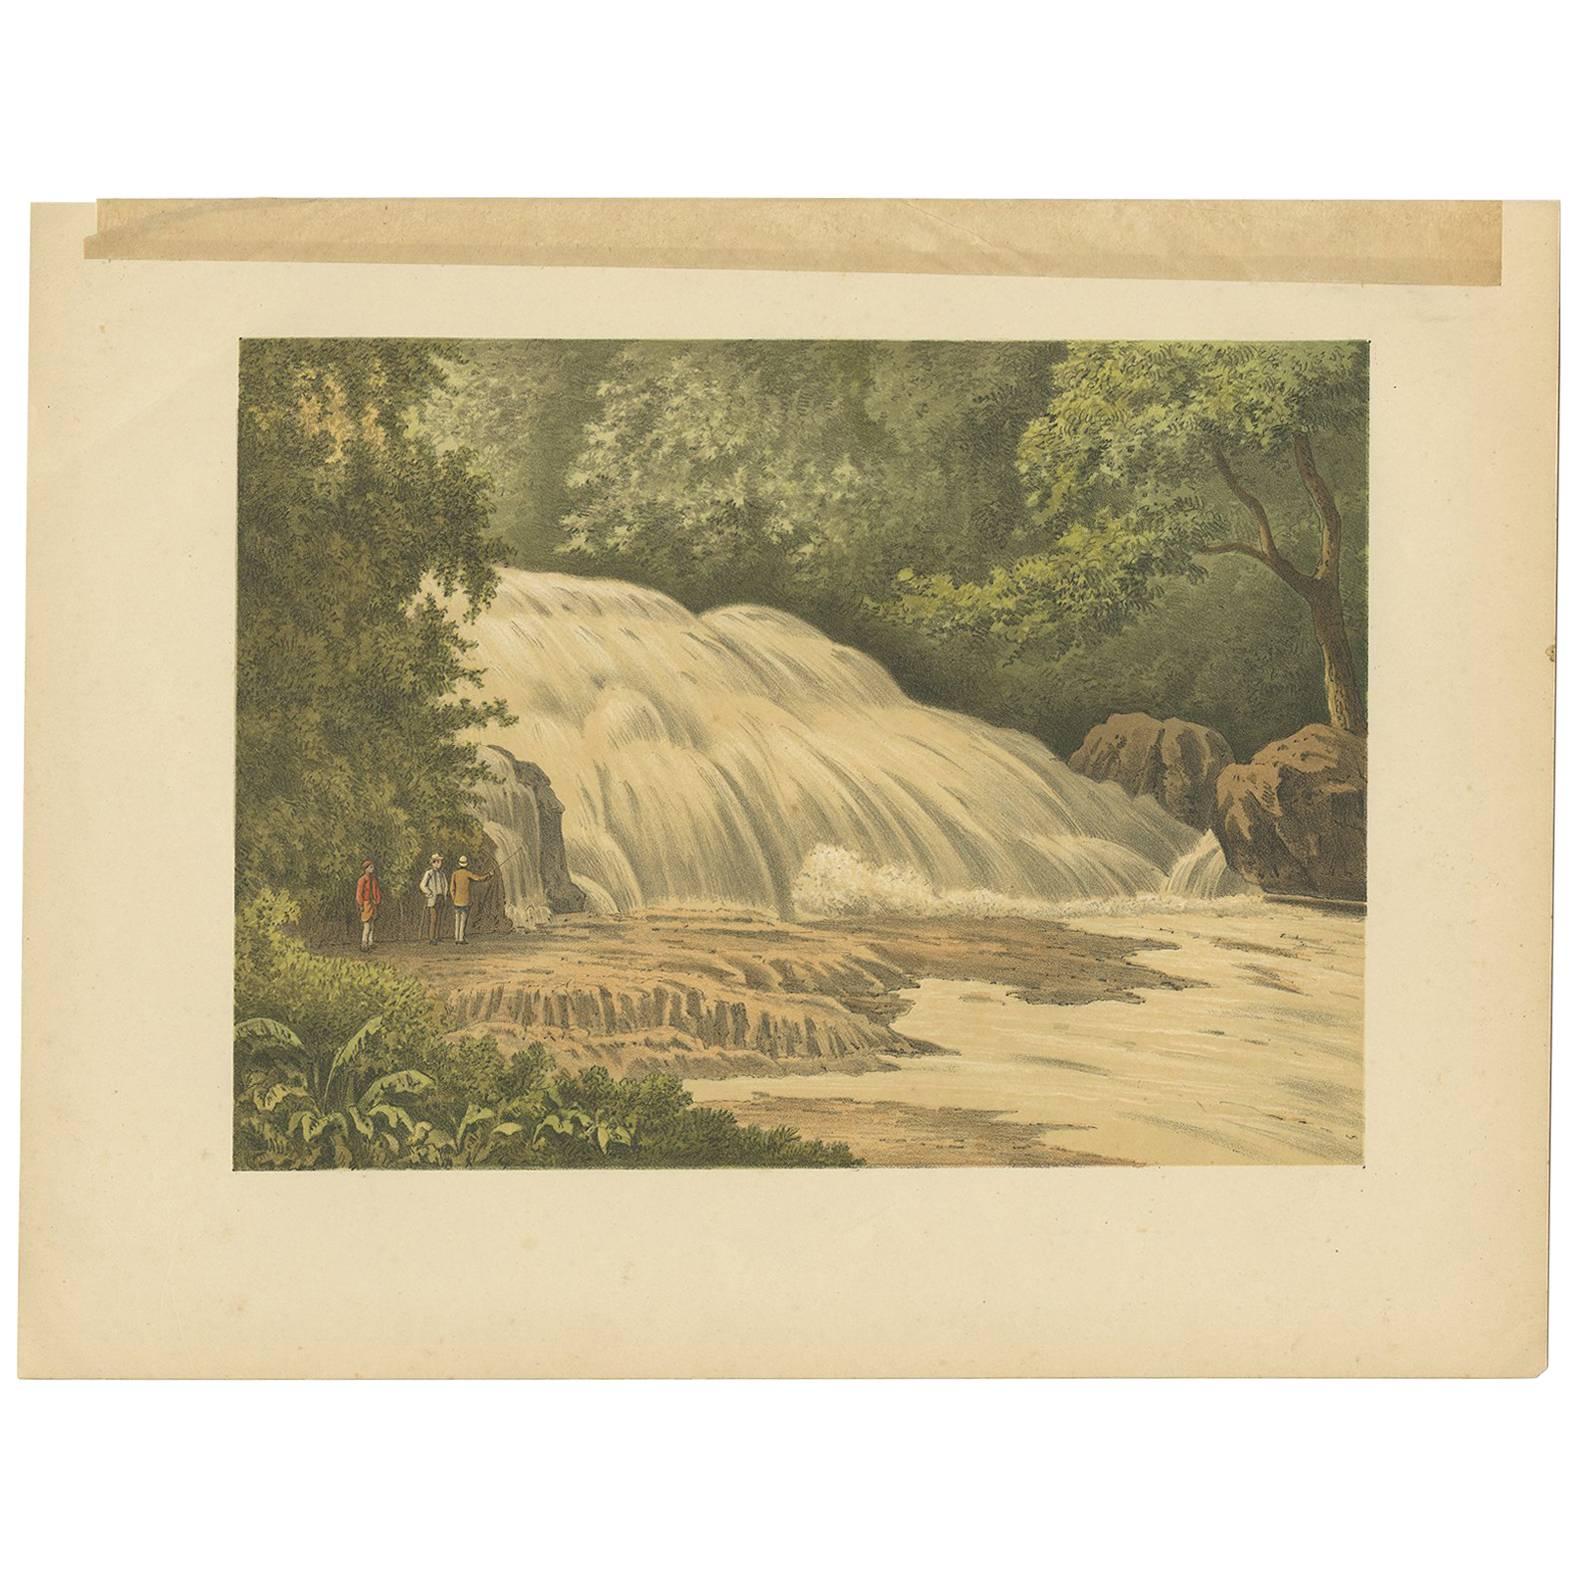 Antique Print of the Bantimurung Waterfall by M.T.H. Perelaer, 1888 For Sale